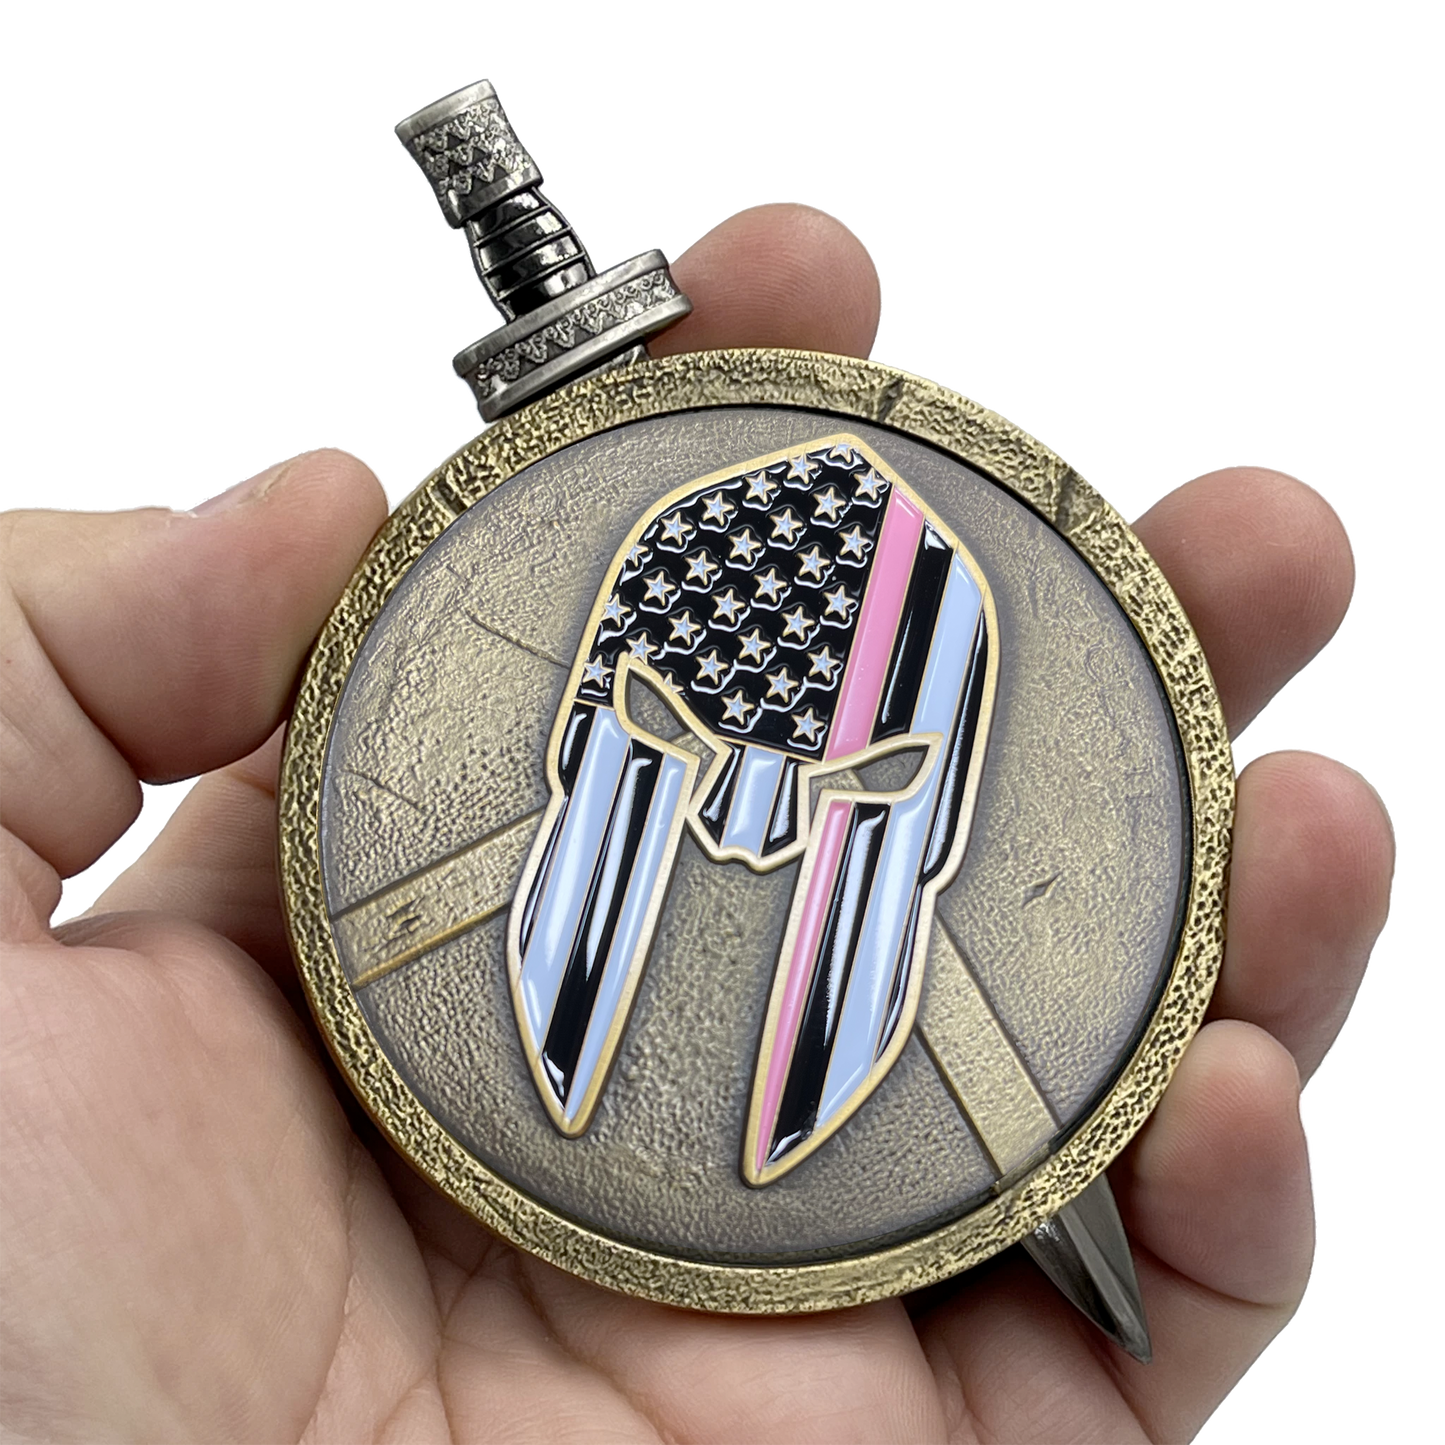 EL3-019 Breast Cancer Awareness Warrior Gladiator Survivor Thin Pink Line Shield with removable Sword Challenge Coin Set Police Sheriff Deputy Marines Army Air Force Navy Coast Guard